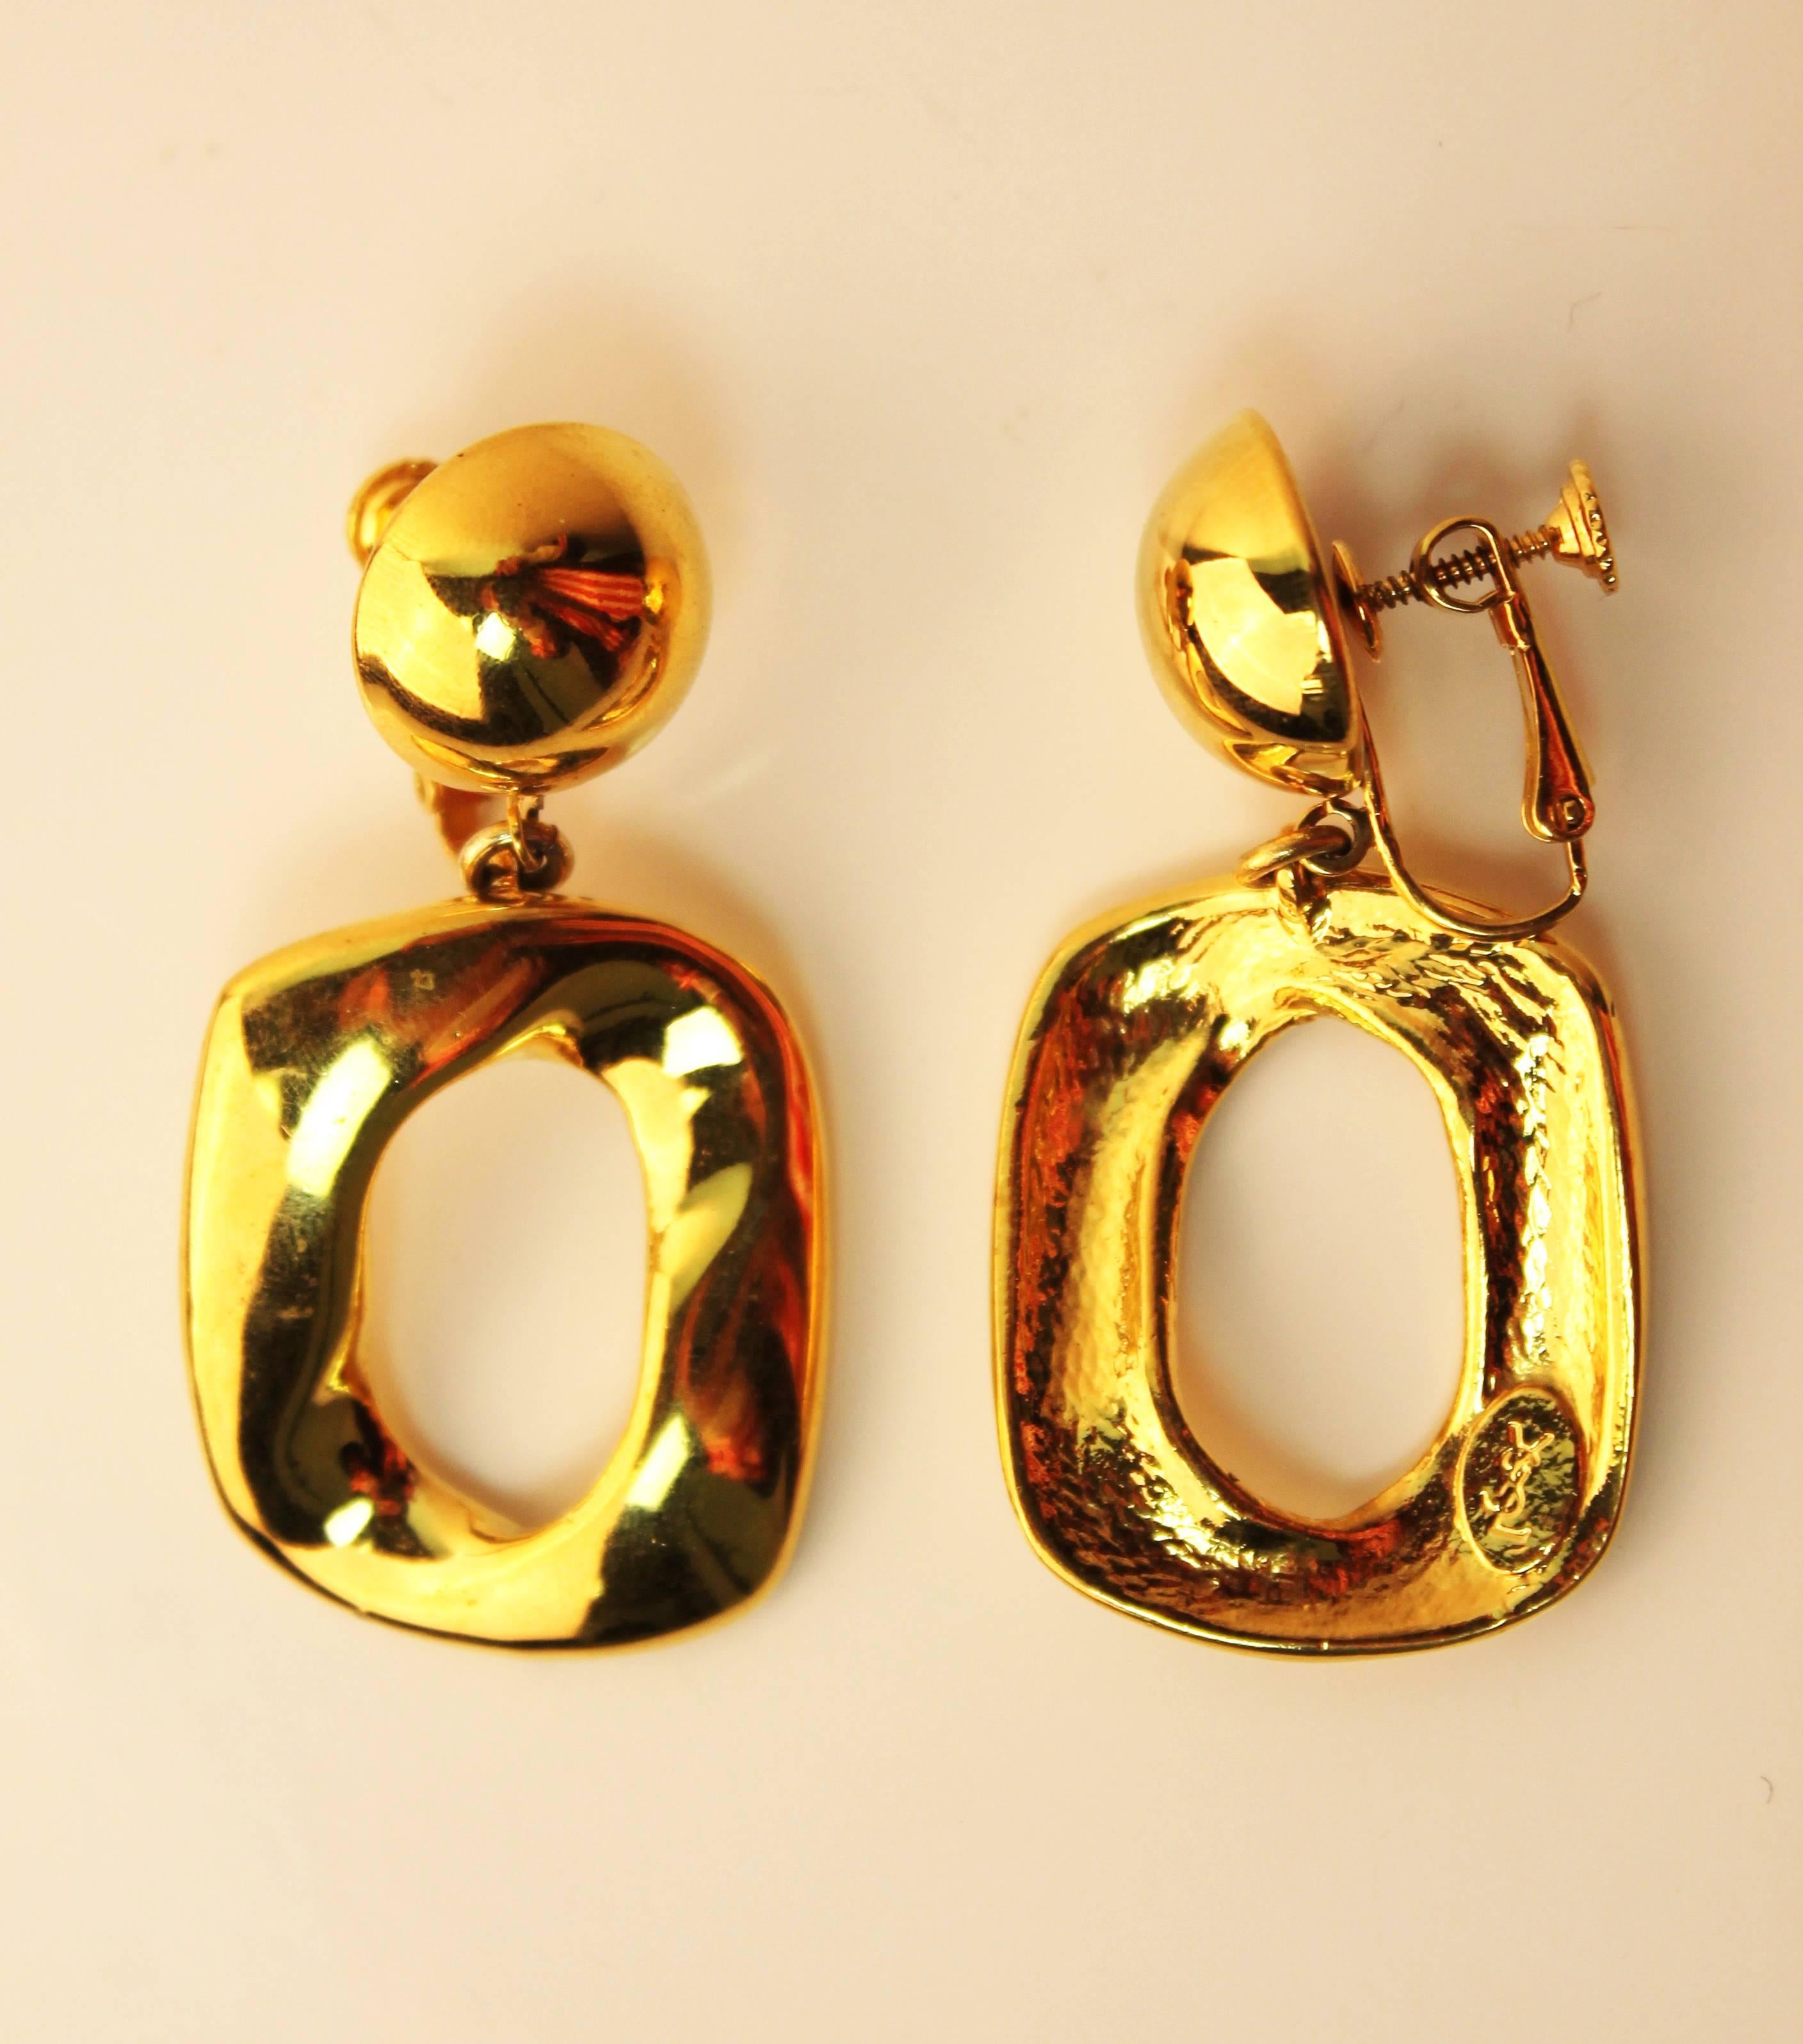 Vintage Yves Saint Laurent Gold-Plated Distorted Square Earrings In Excellent Condition For Sale In London, GB